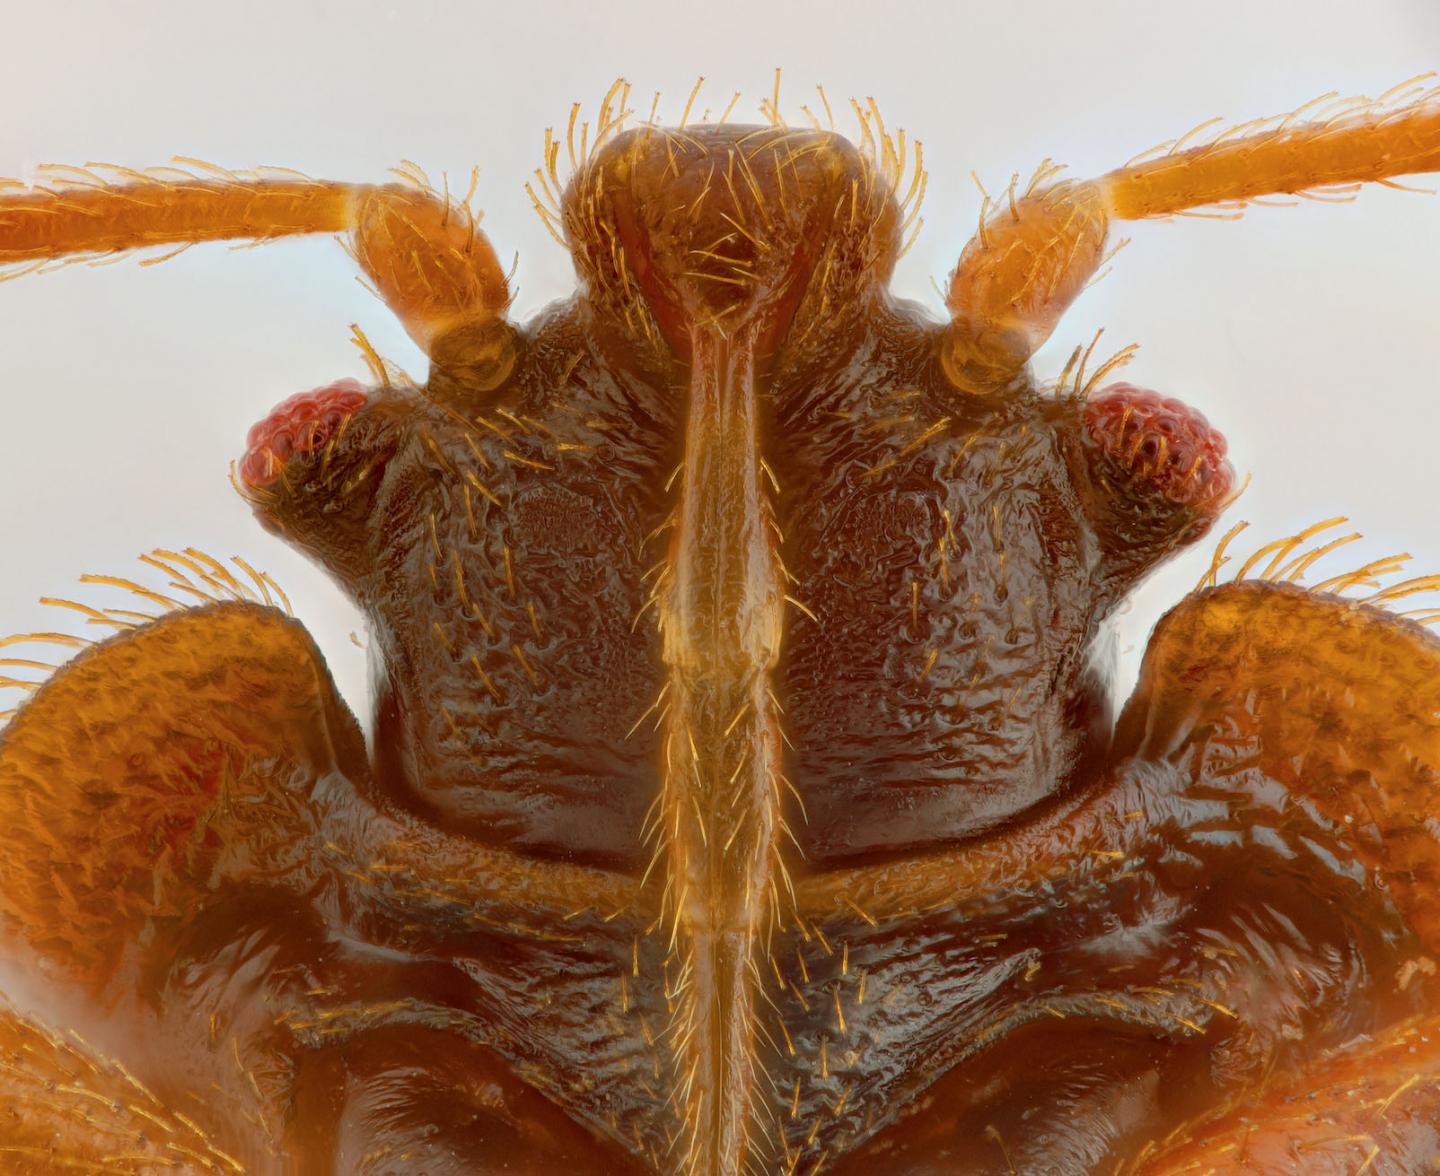 This Is An Image of a Bed Bug